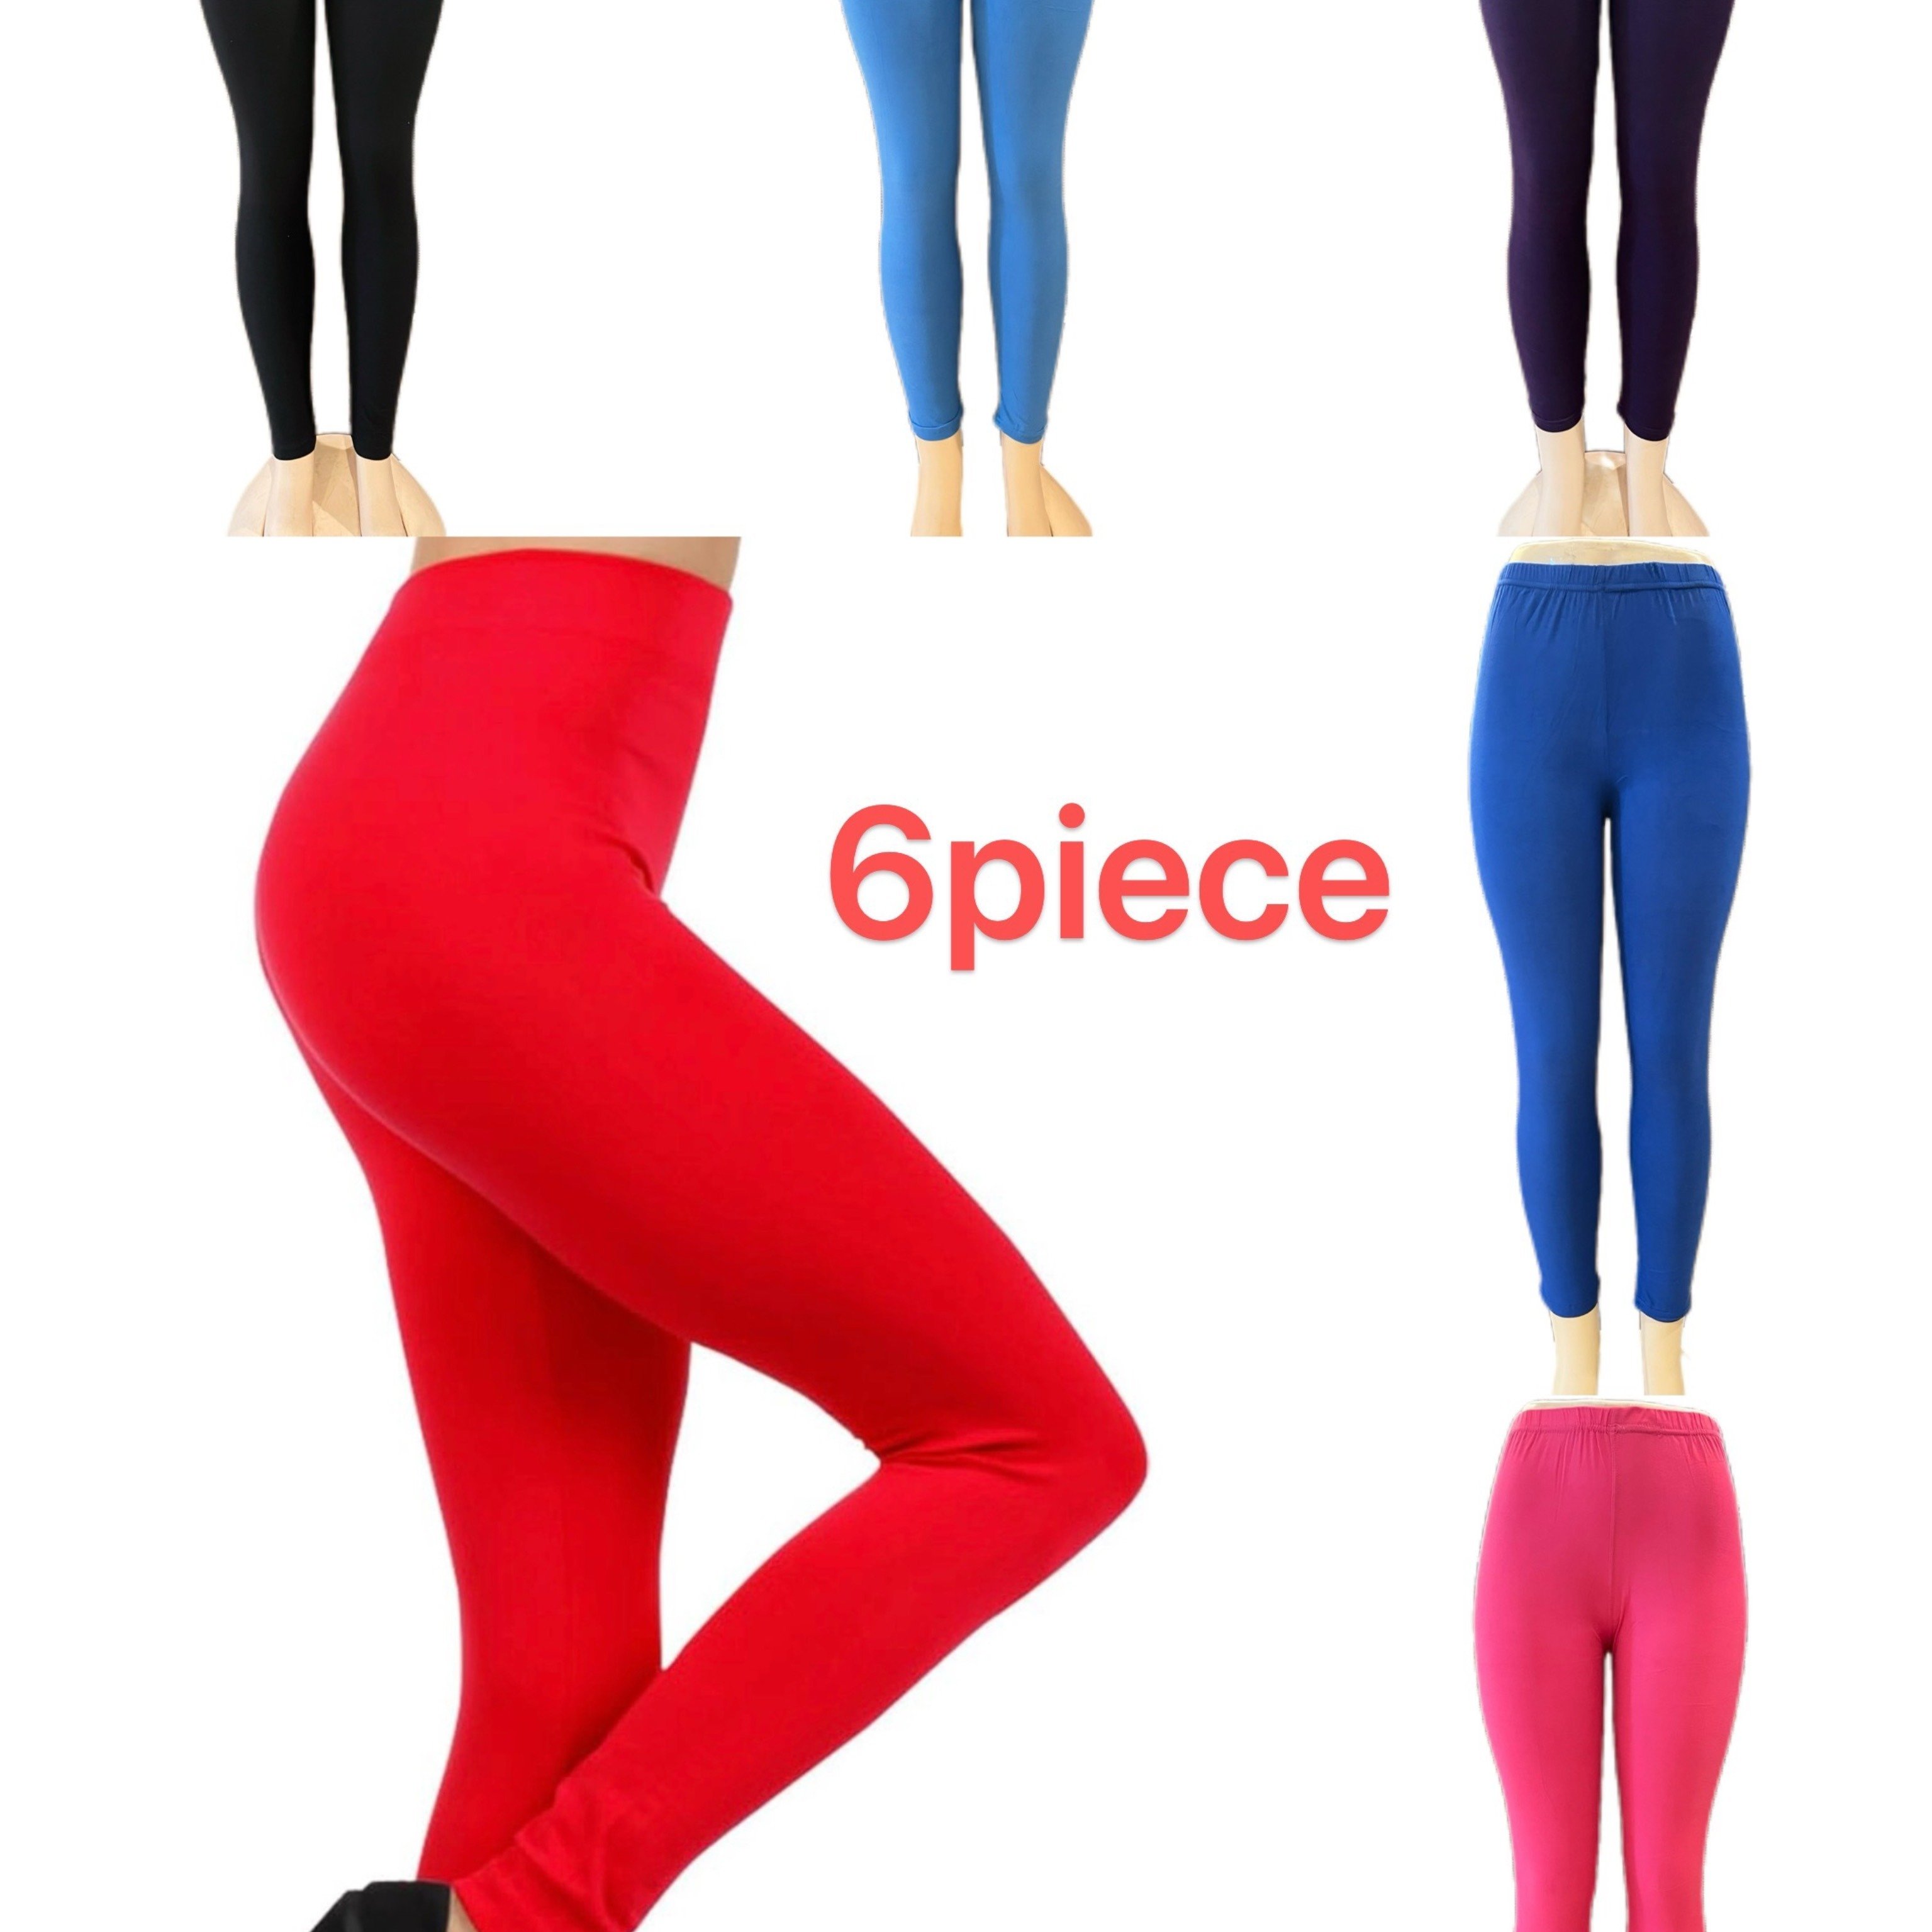 

918a 6 Pieces High Waist Plain Yoga Leggings - Comfortable Casual Sweatpants - Stretchable, Moisture-wicking For Fitness & Everyday Style Mixed Colors